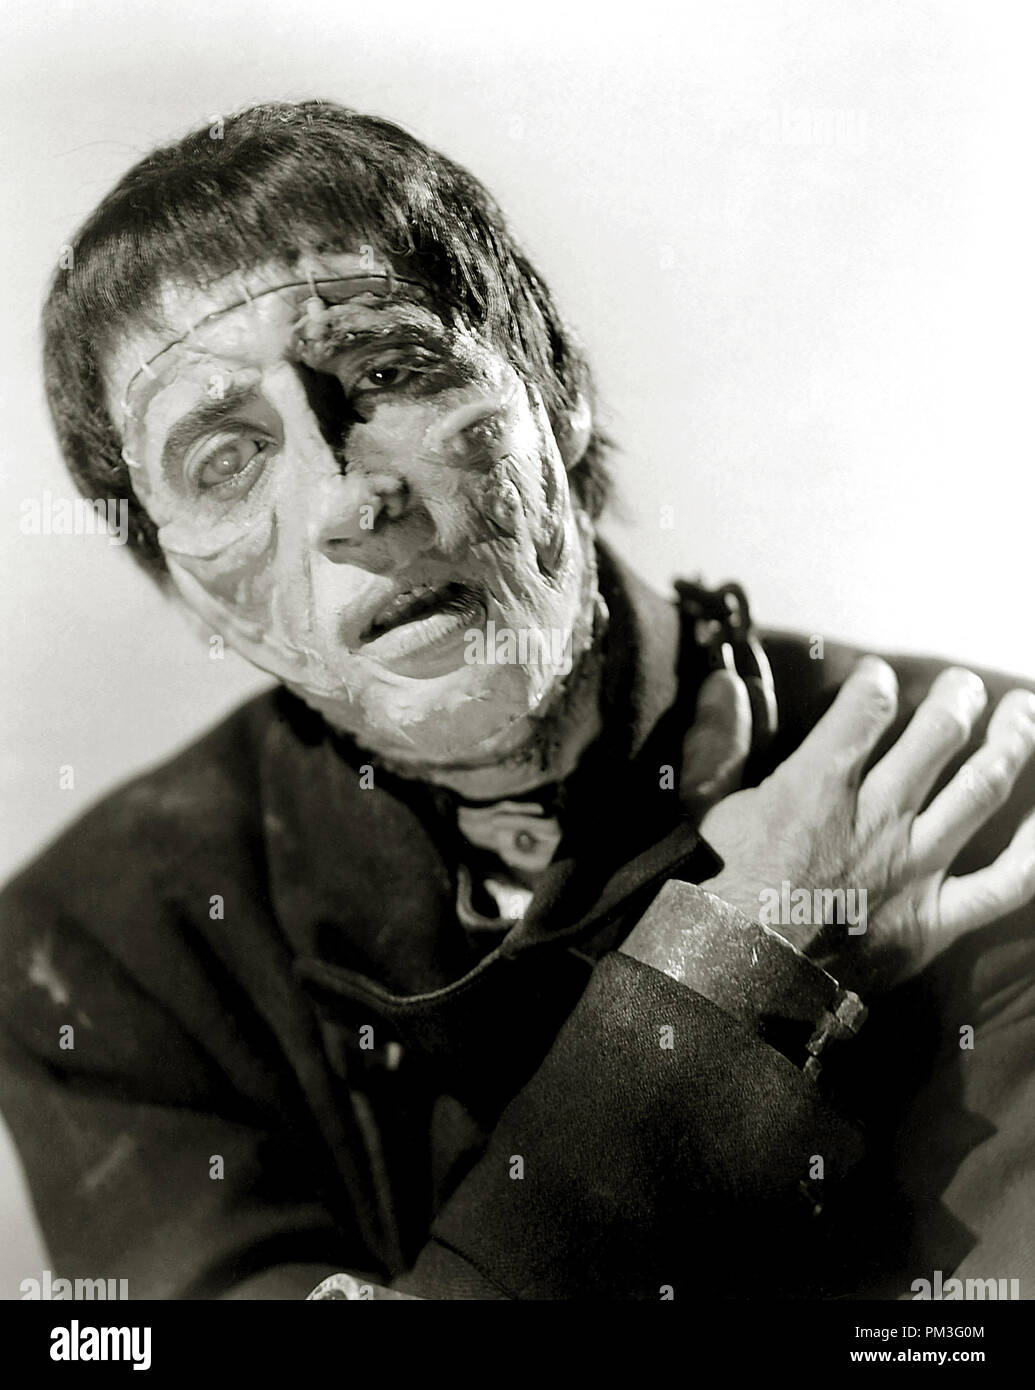 Christopher Lee, 'The Curse of Frankenstein' 1957 Hammer Films  File Reference # 30732 303 Stock Photo